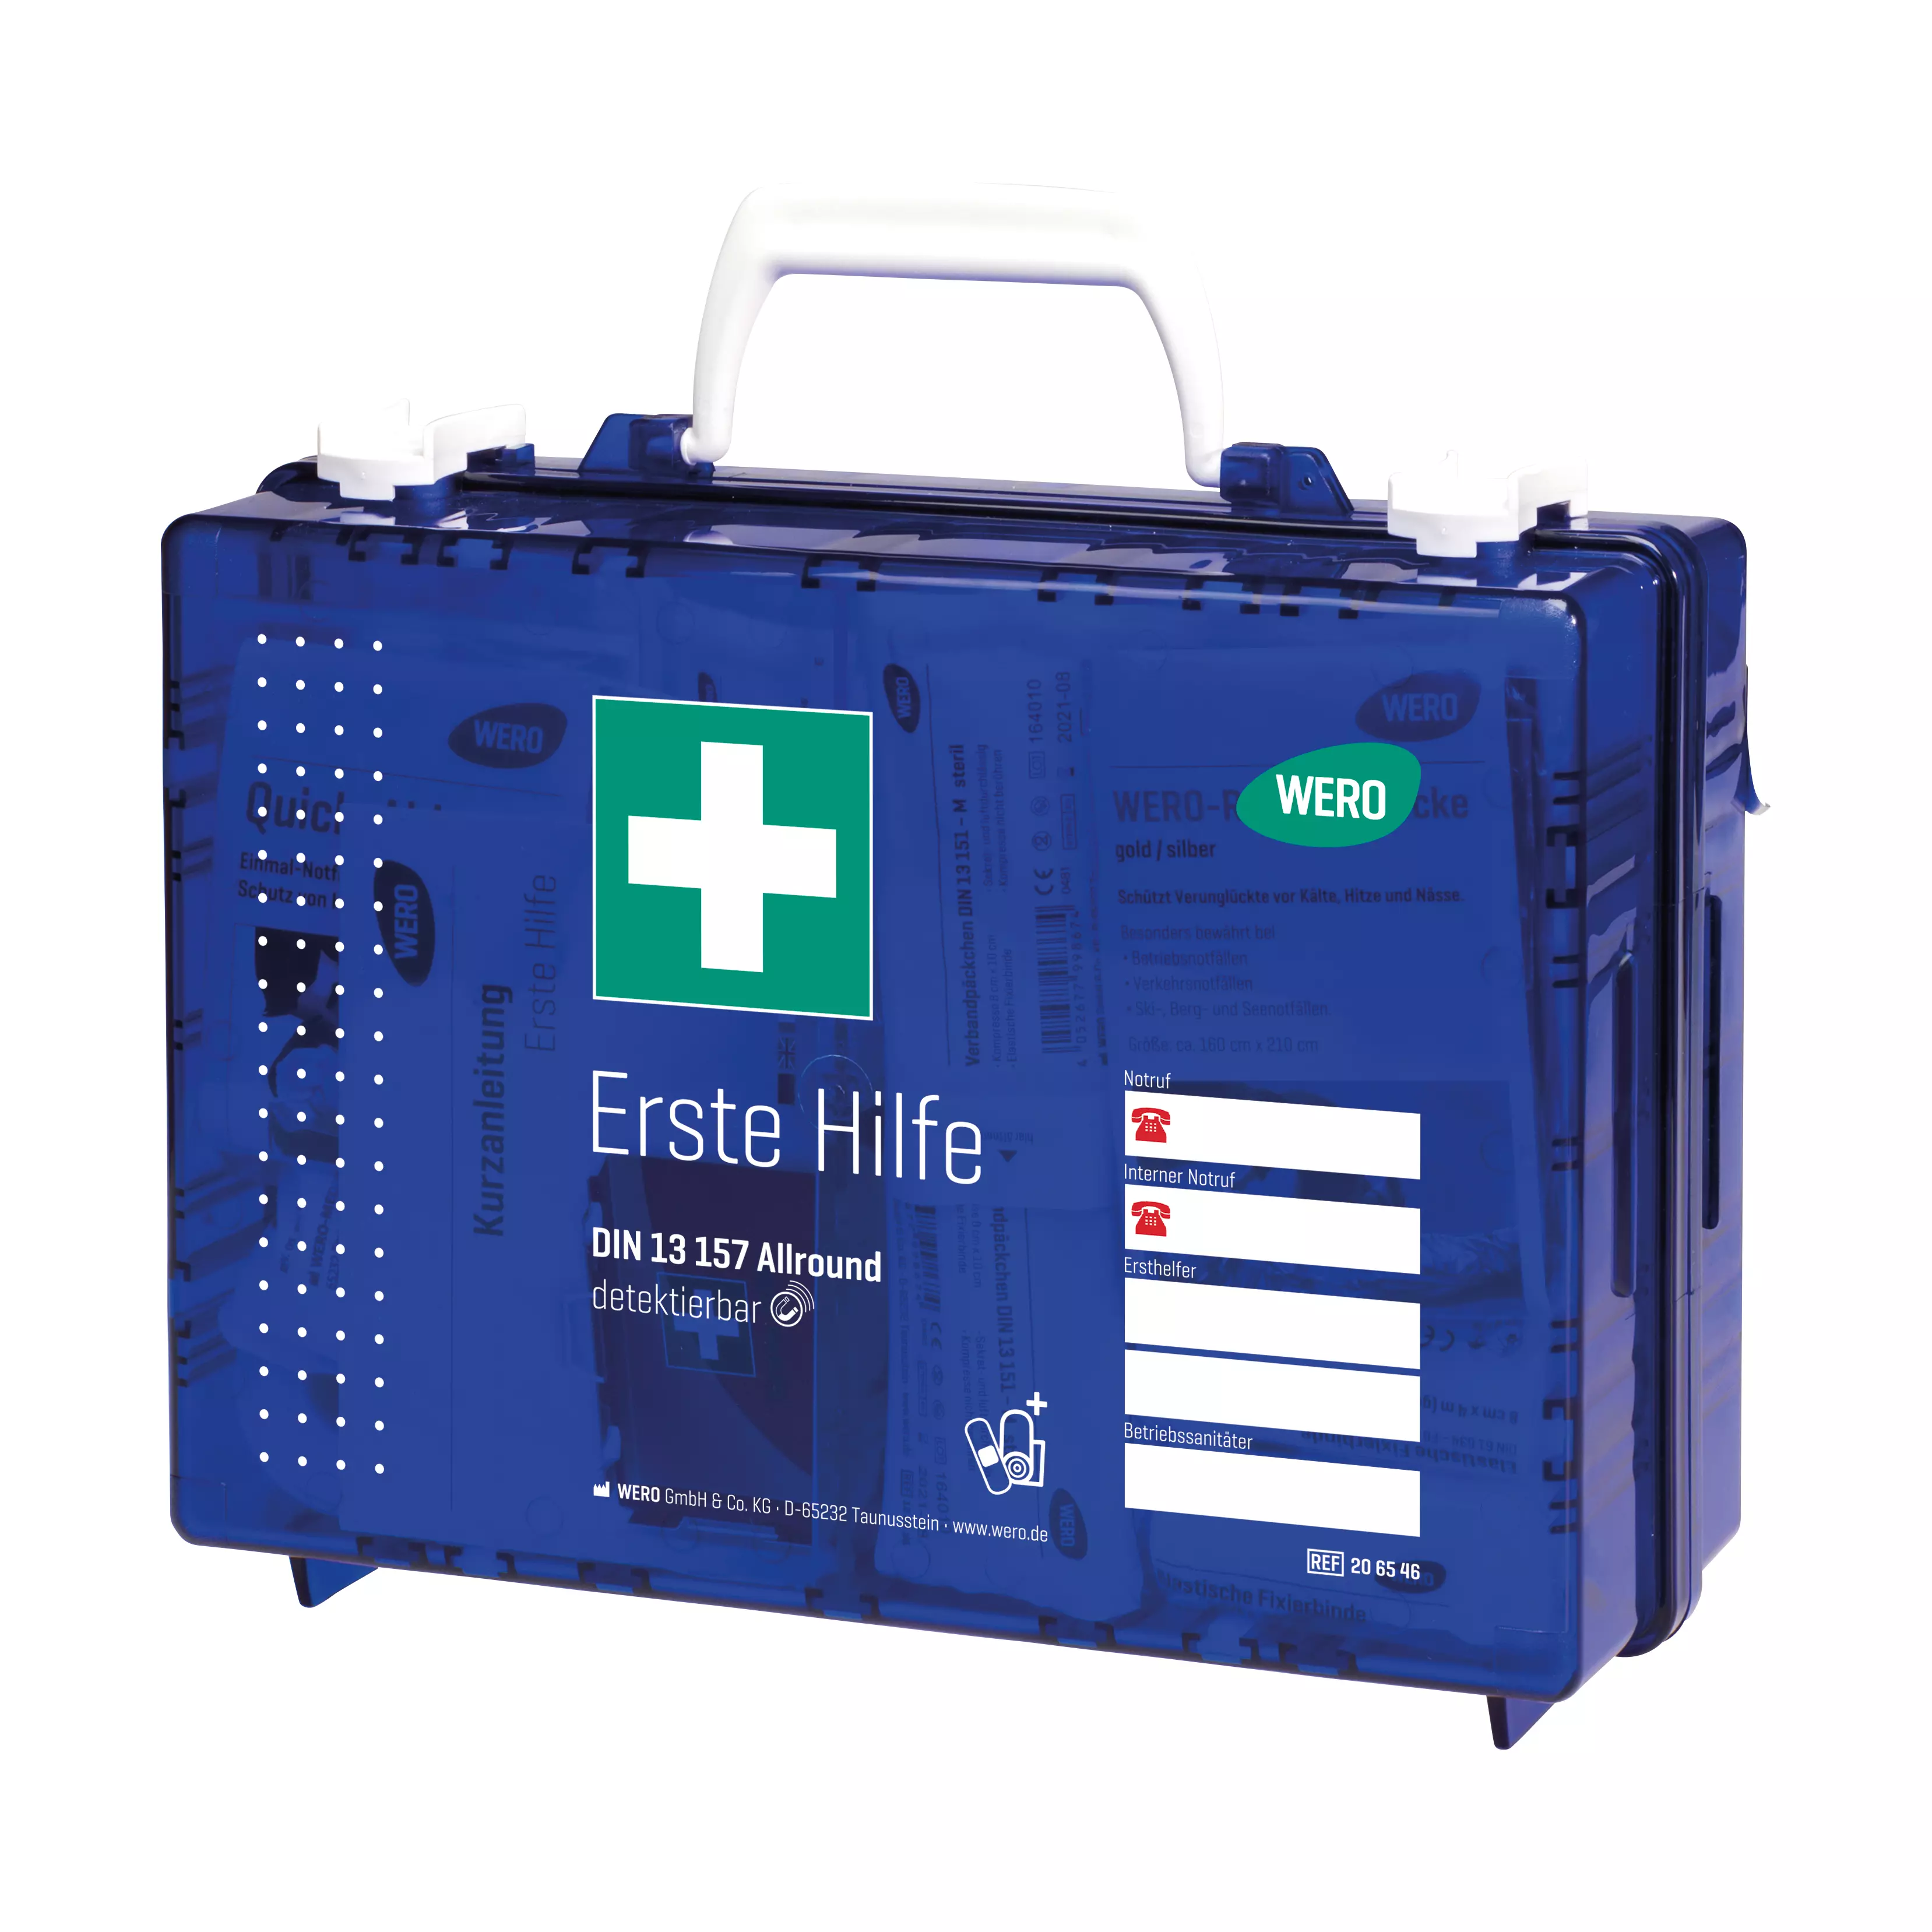 Werotop® clear first aid kit DIN 13157 Allround, detectable